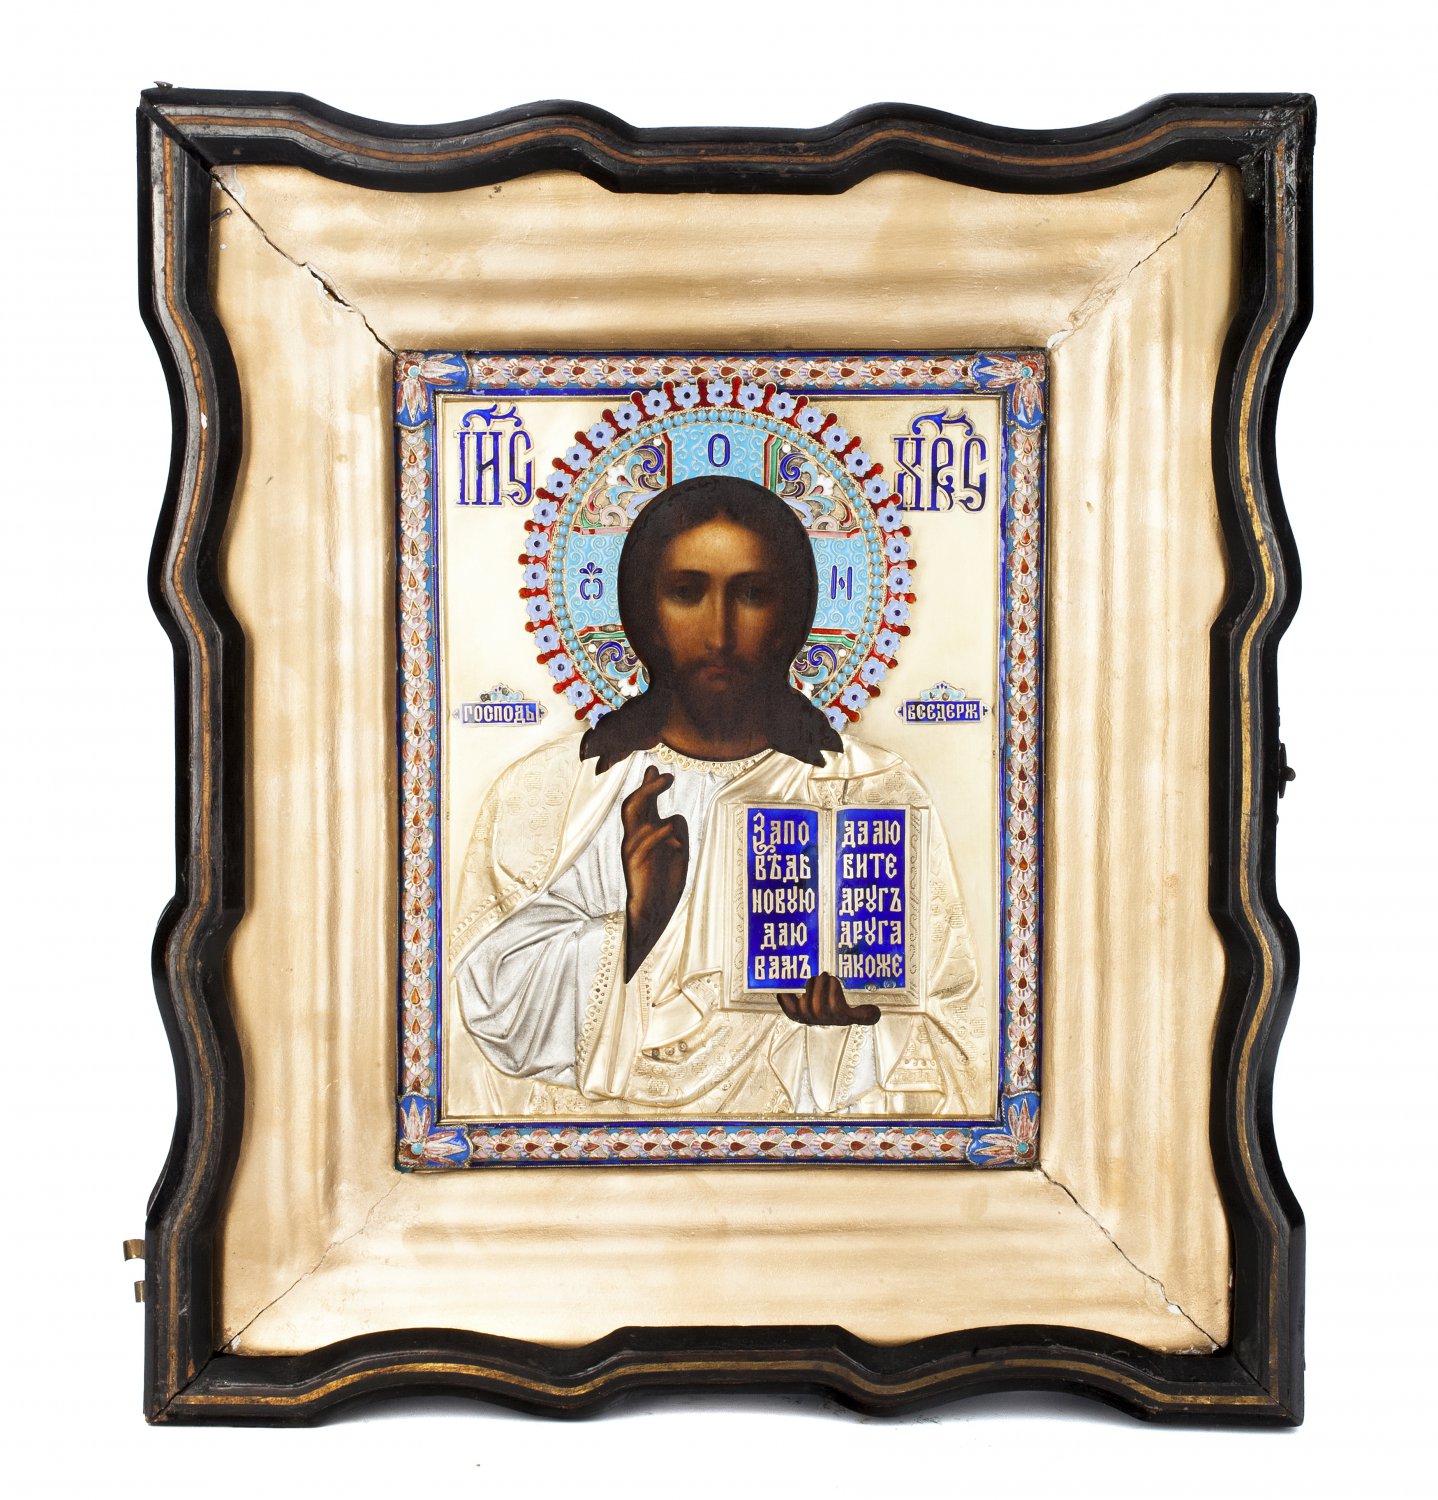 Decor Art. Russia. Silver Enamel Icon of The Lord Almighty.